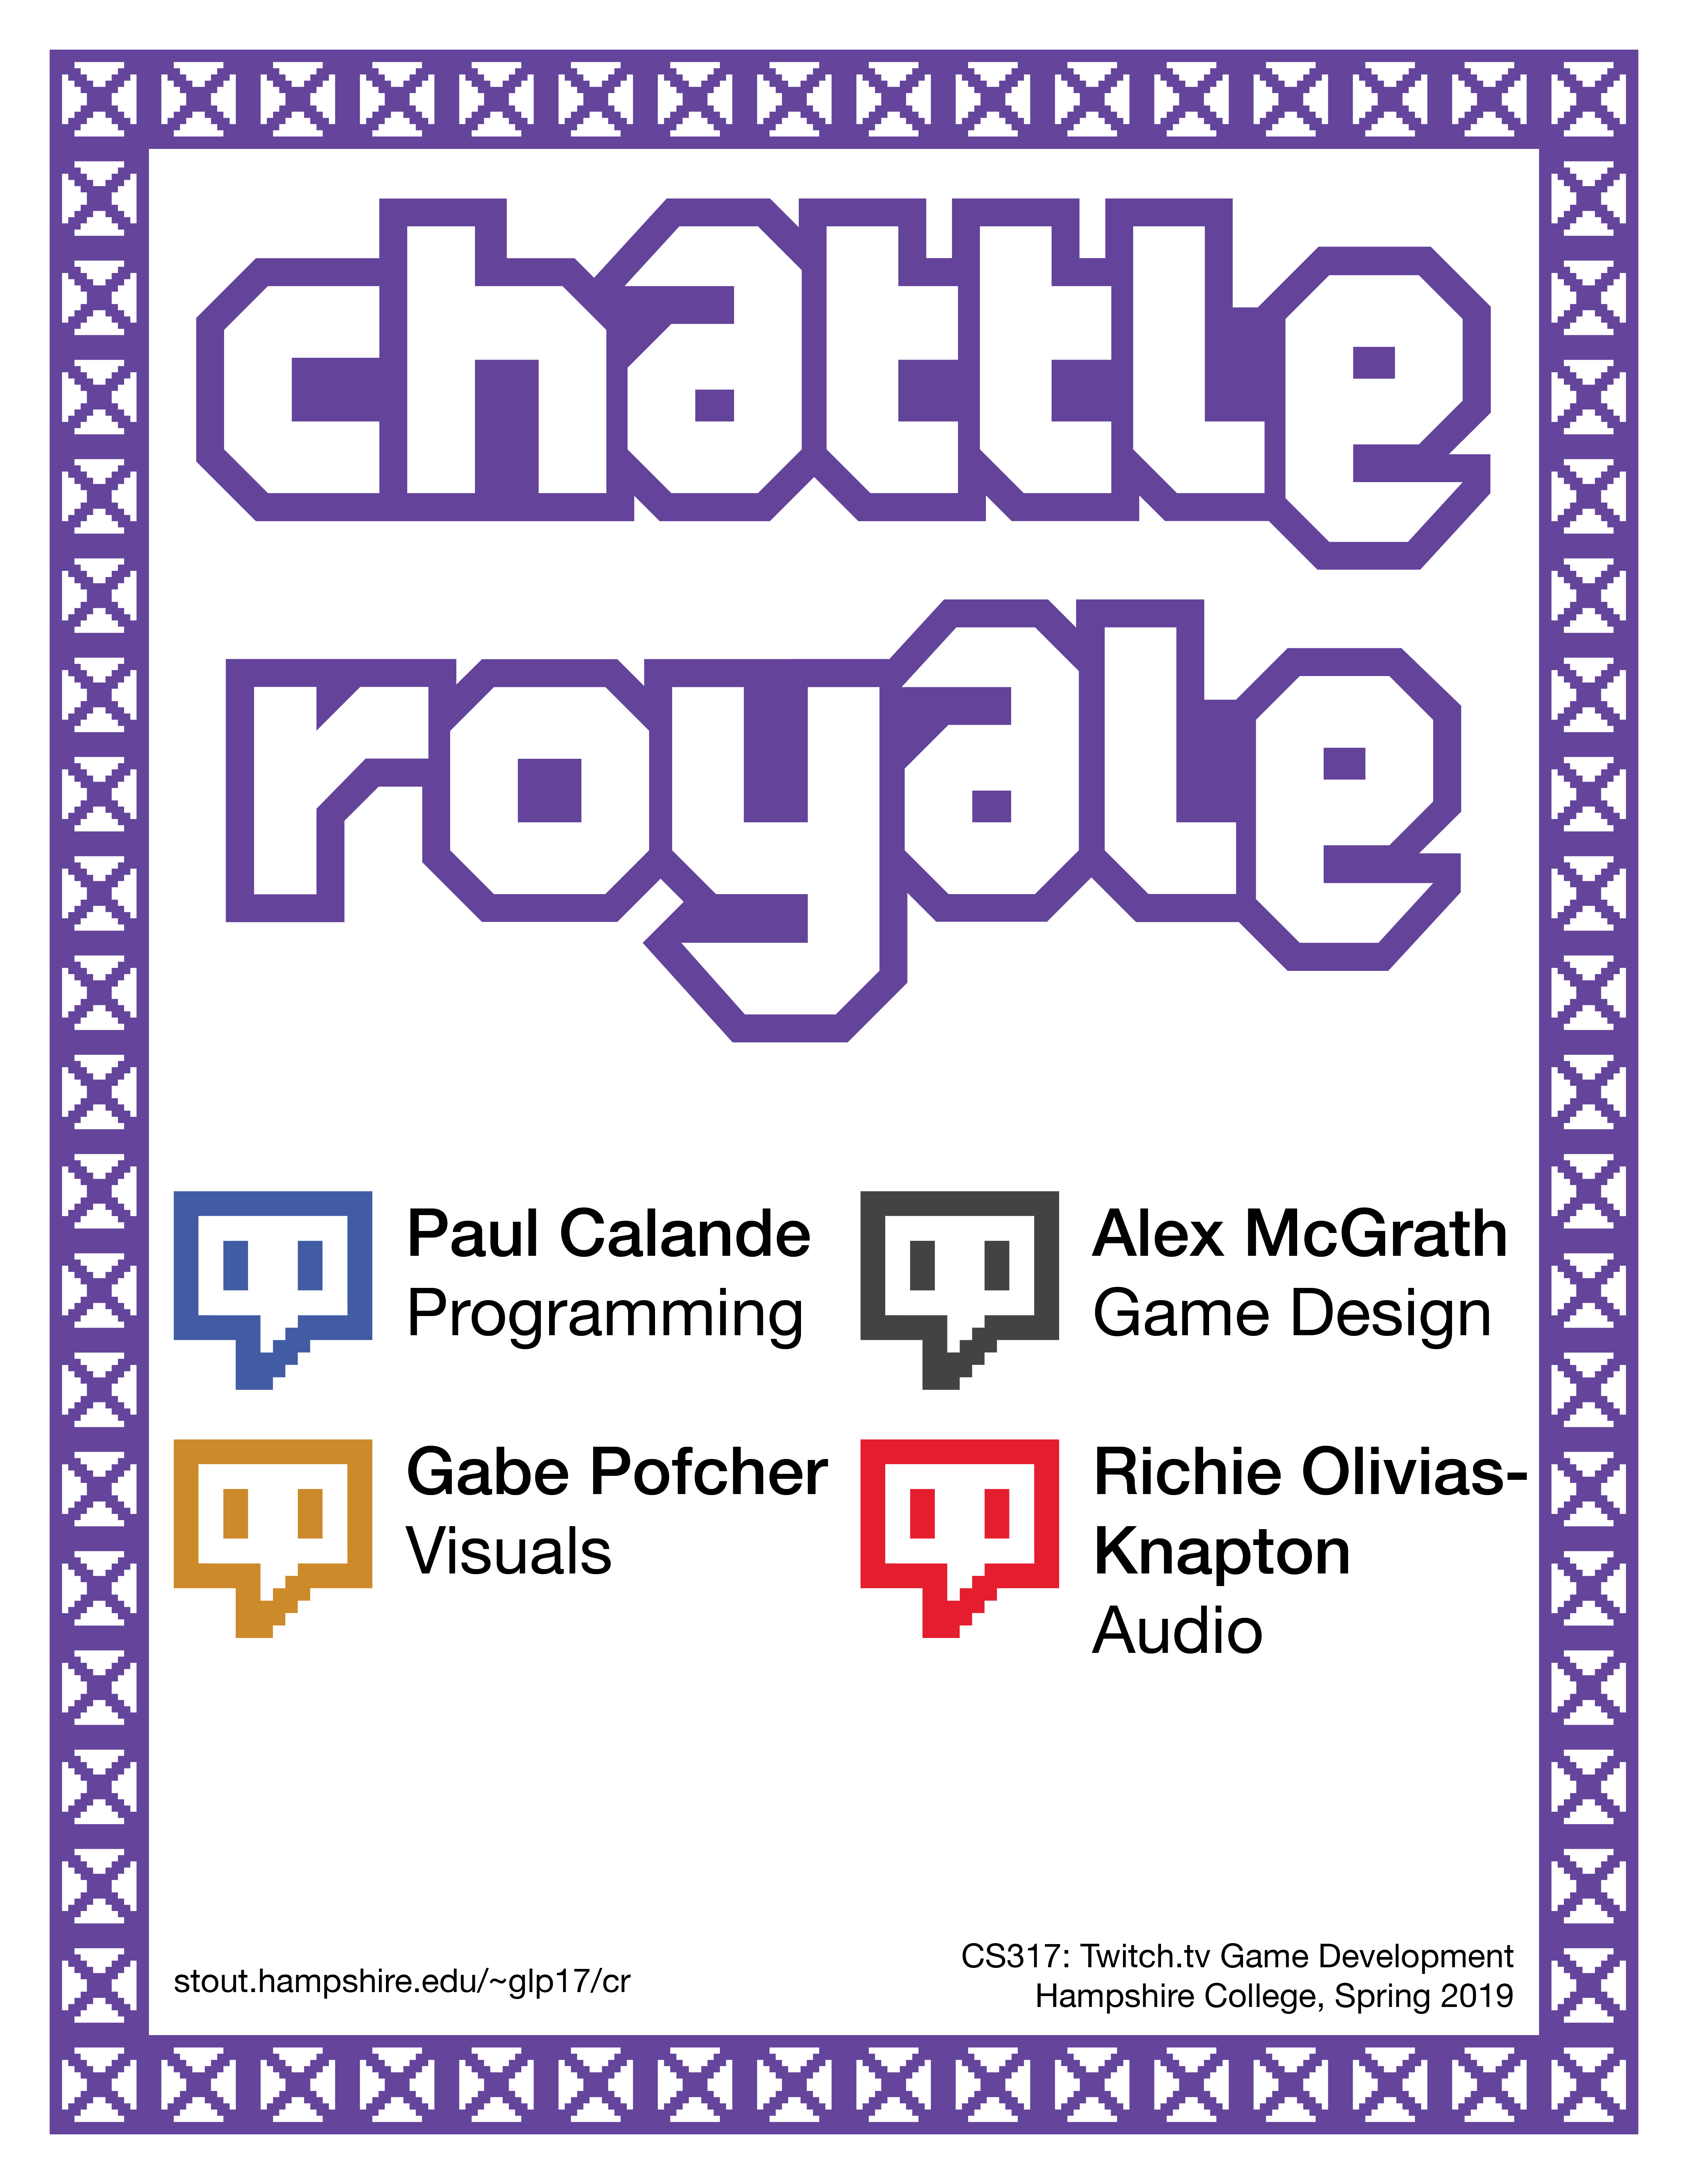 Chatle Royale poster